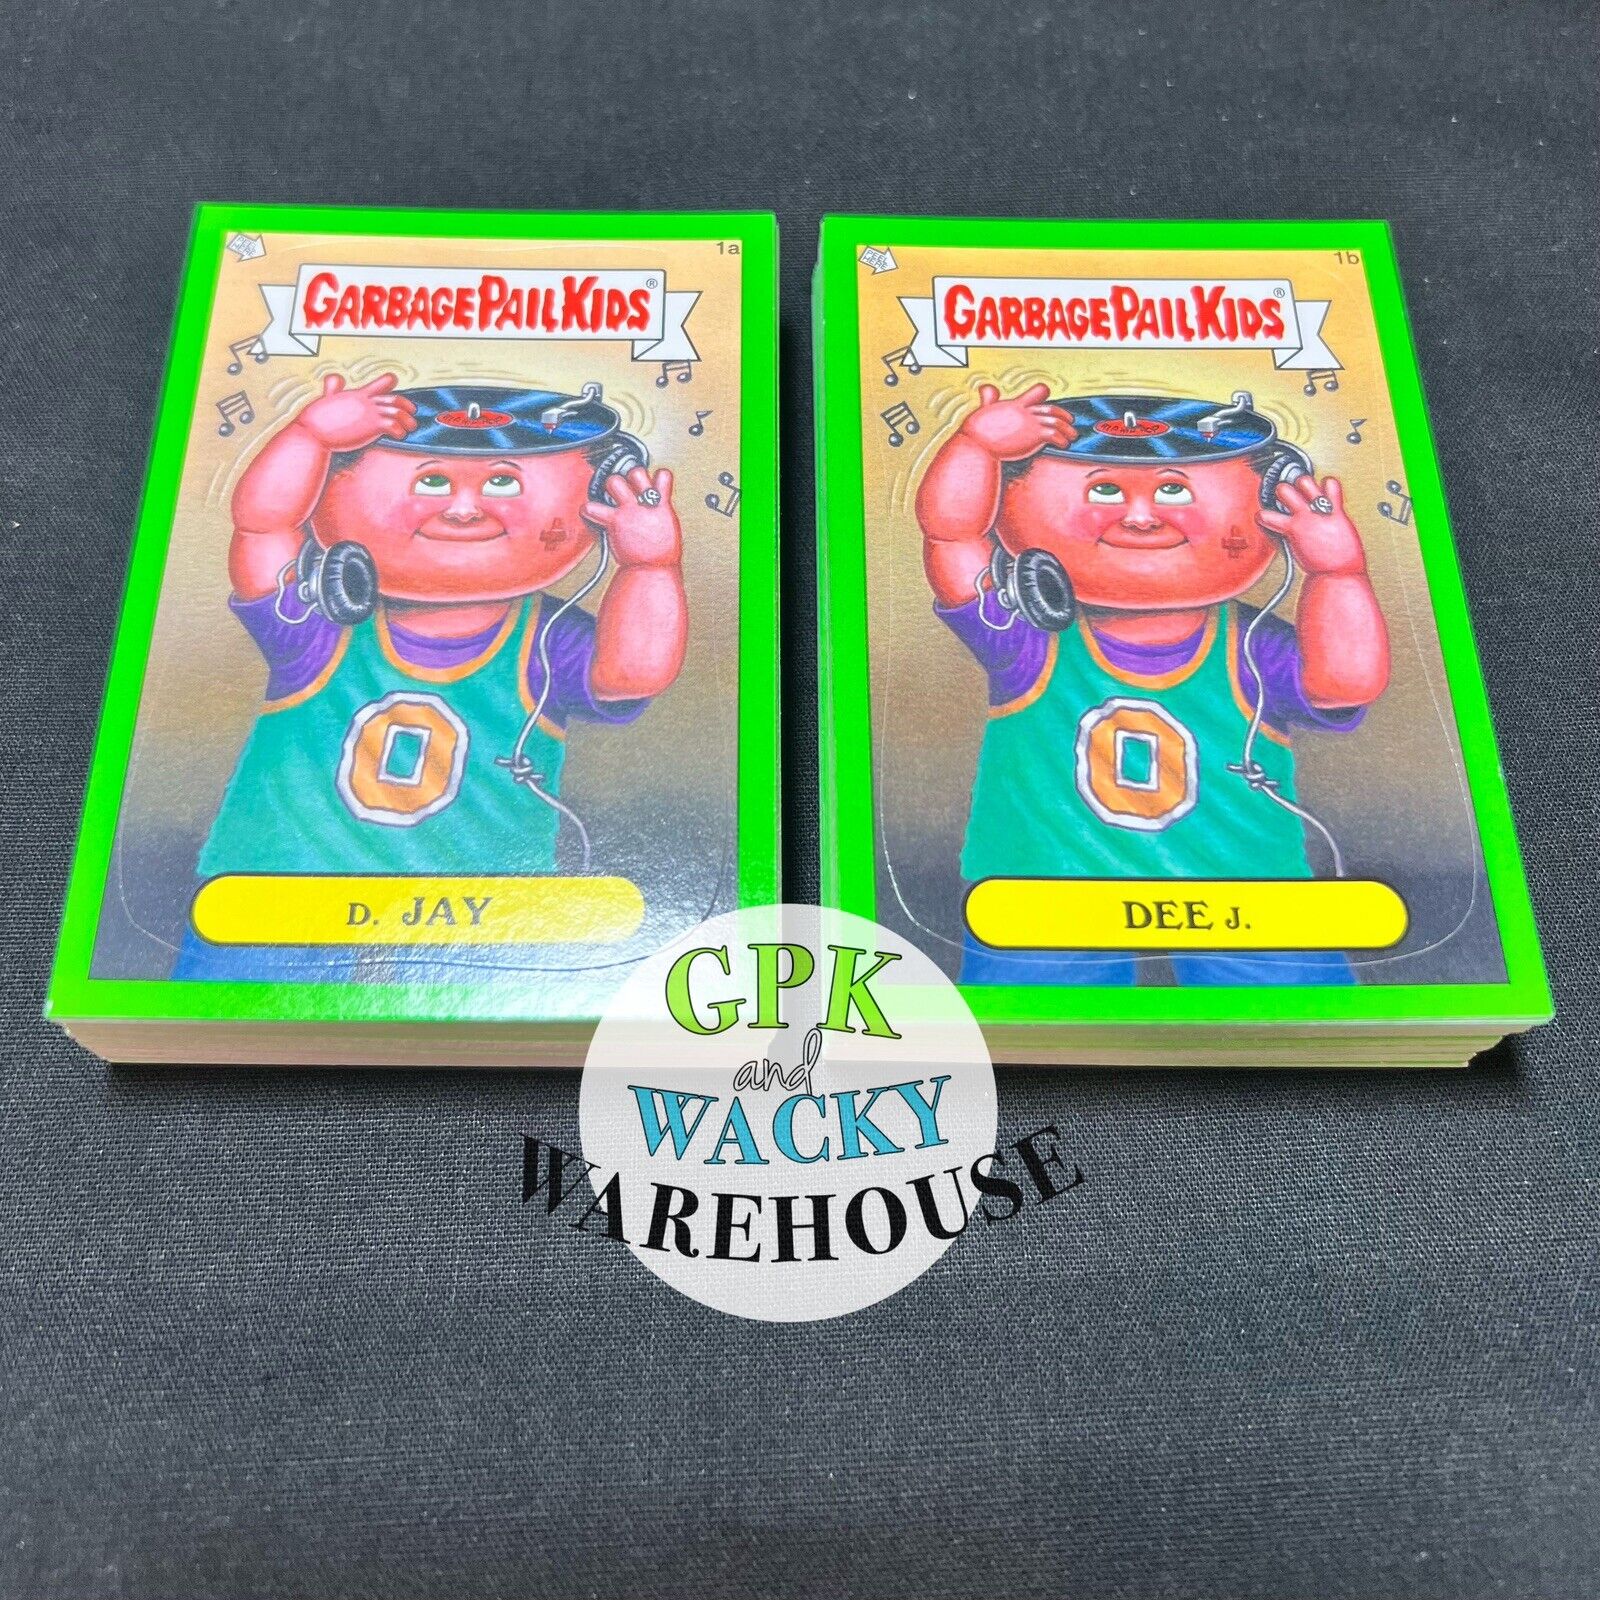 2012 TOPPS GARBAGE PAIL KIDS BNS 1 COMPLETE GREEN SET 110 CARDS BRAND NEW SERIES